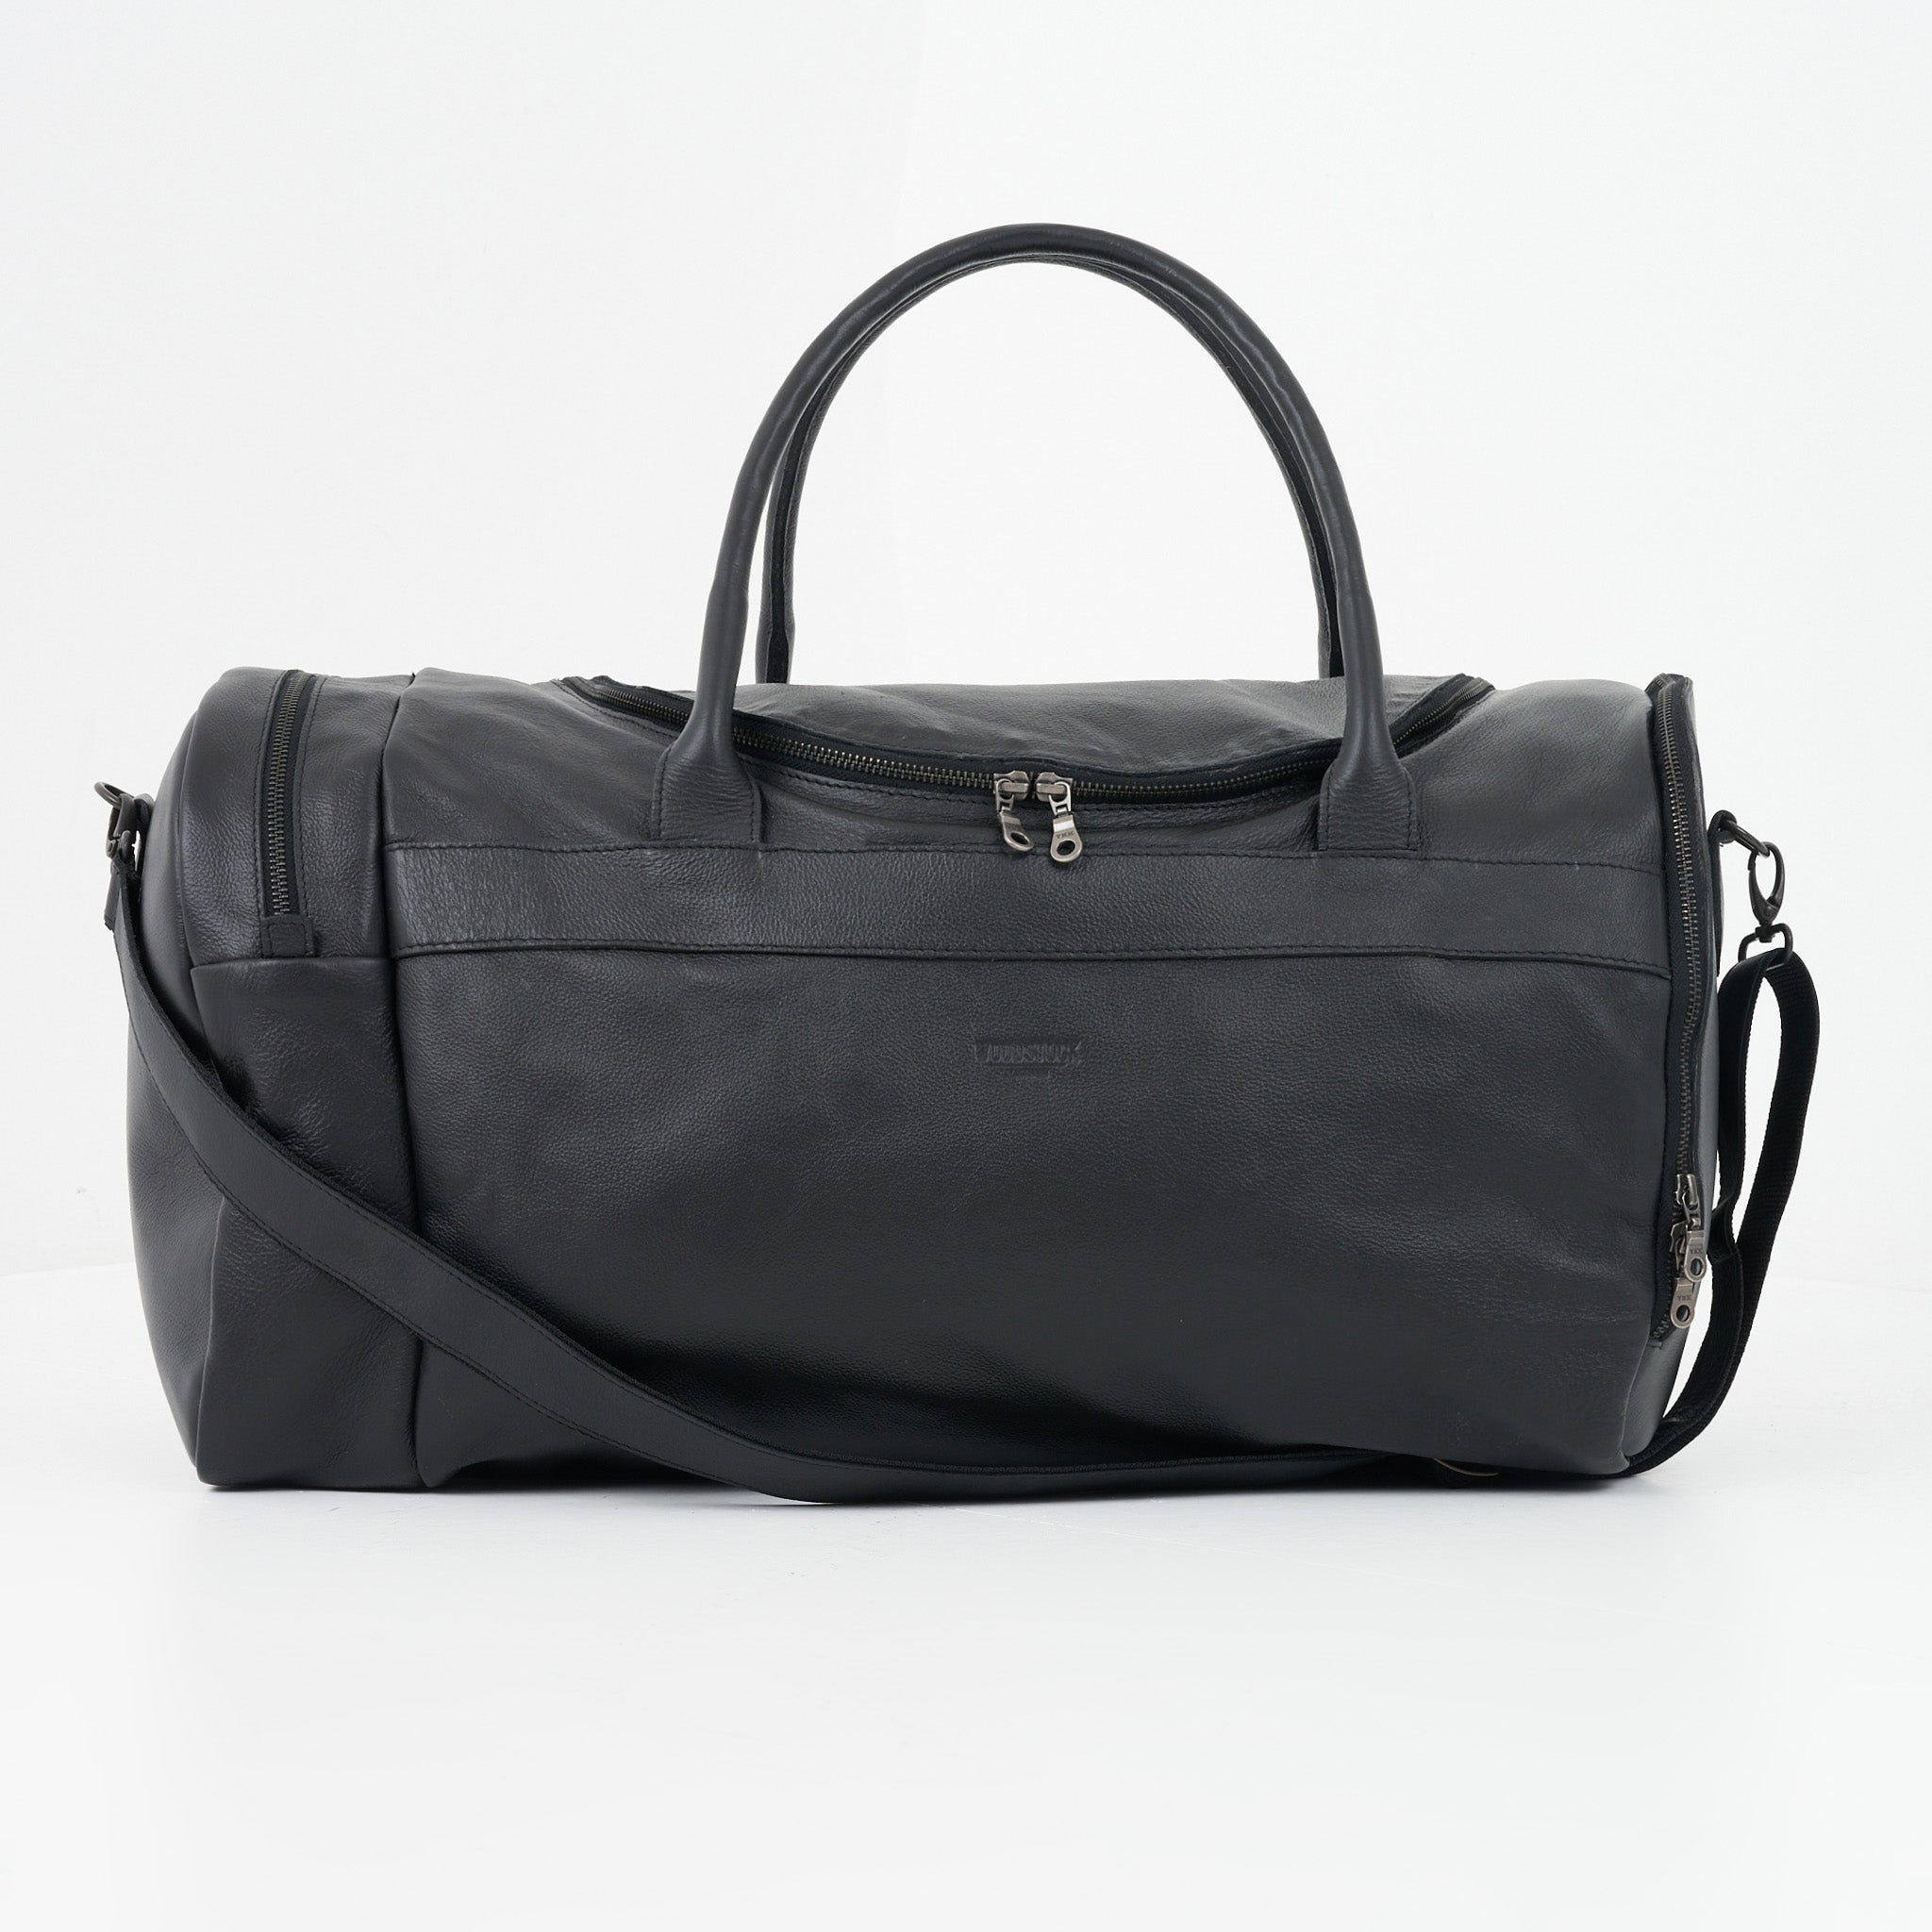 Black Genuine Leather Sports Duffel Bag with Waterproof Lining &amp; Sneaker Compartment